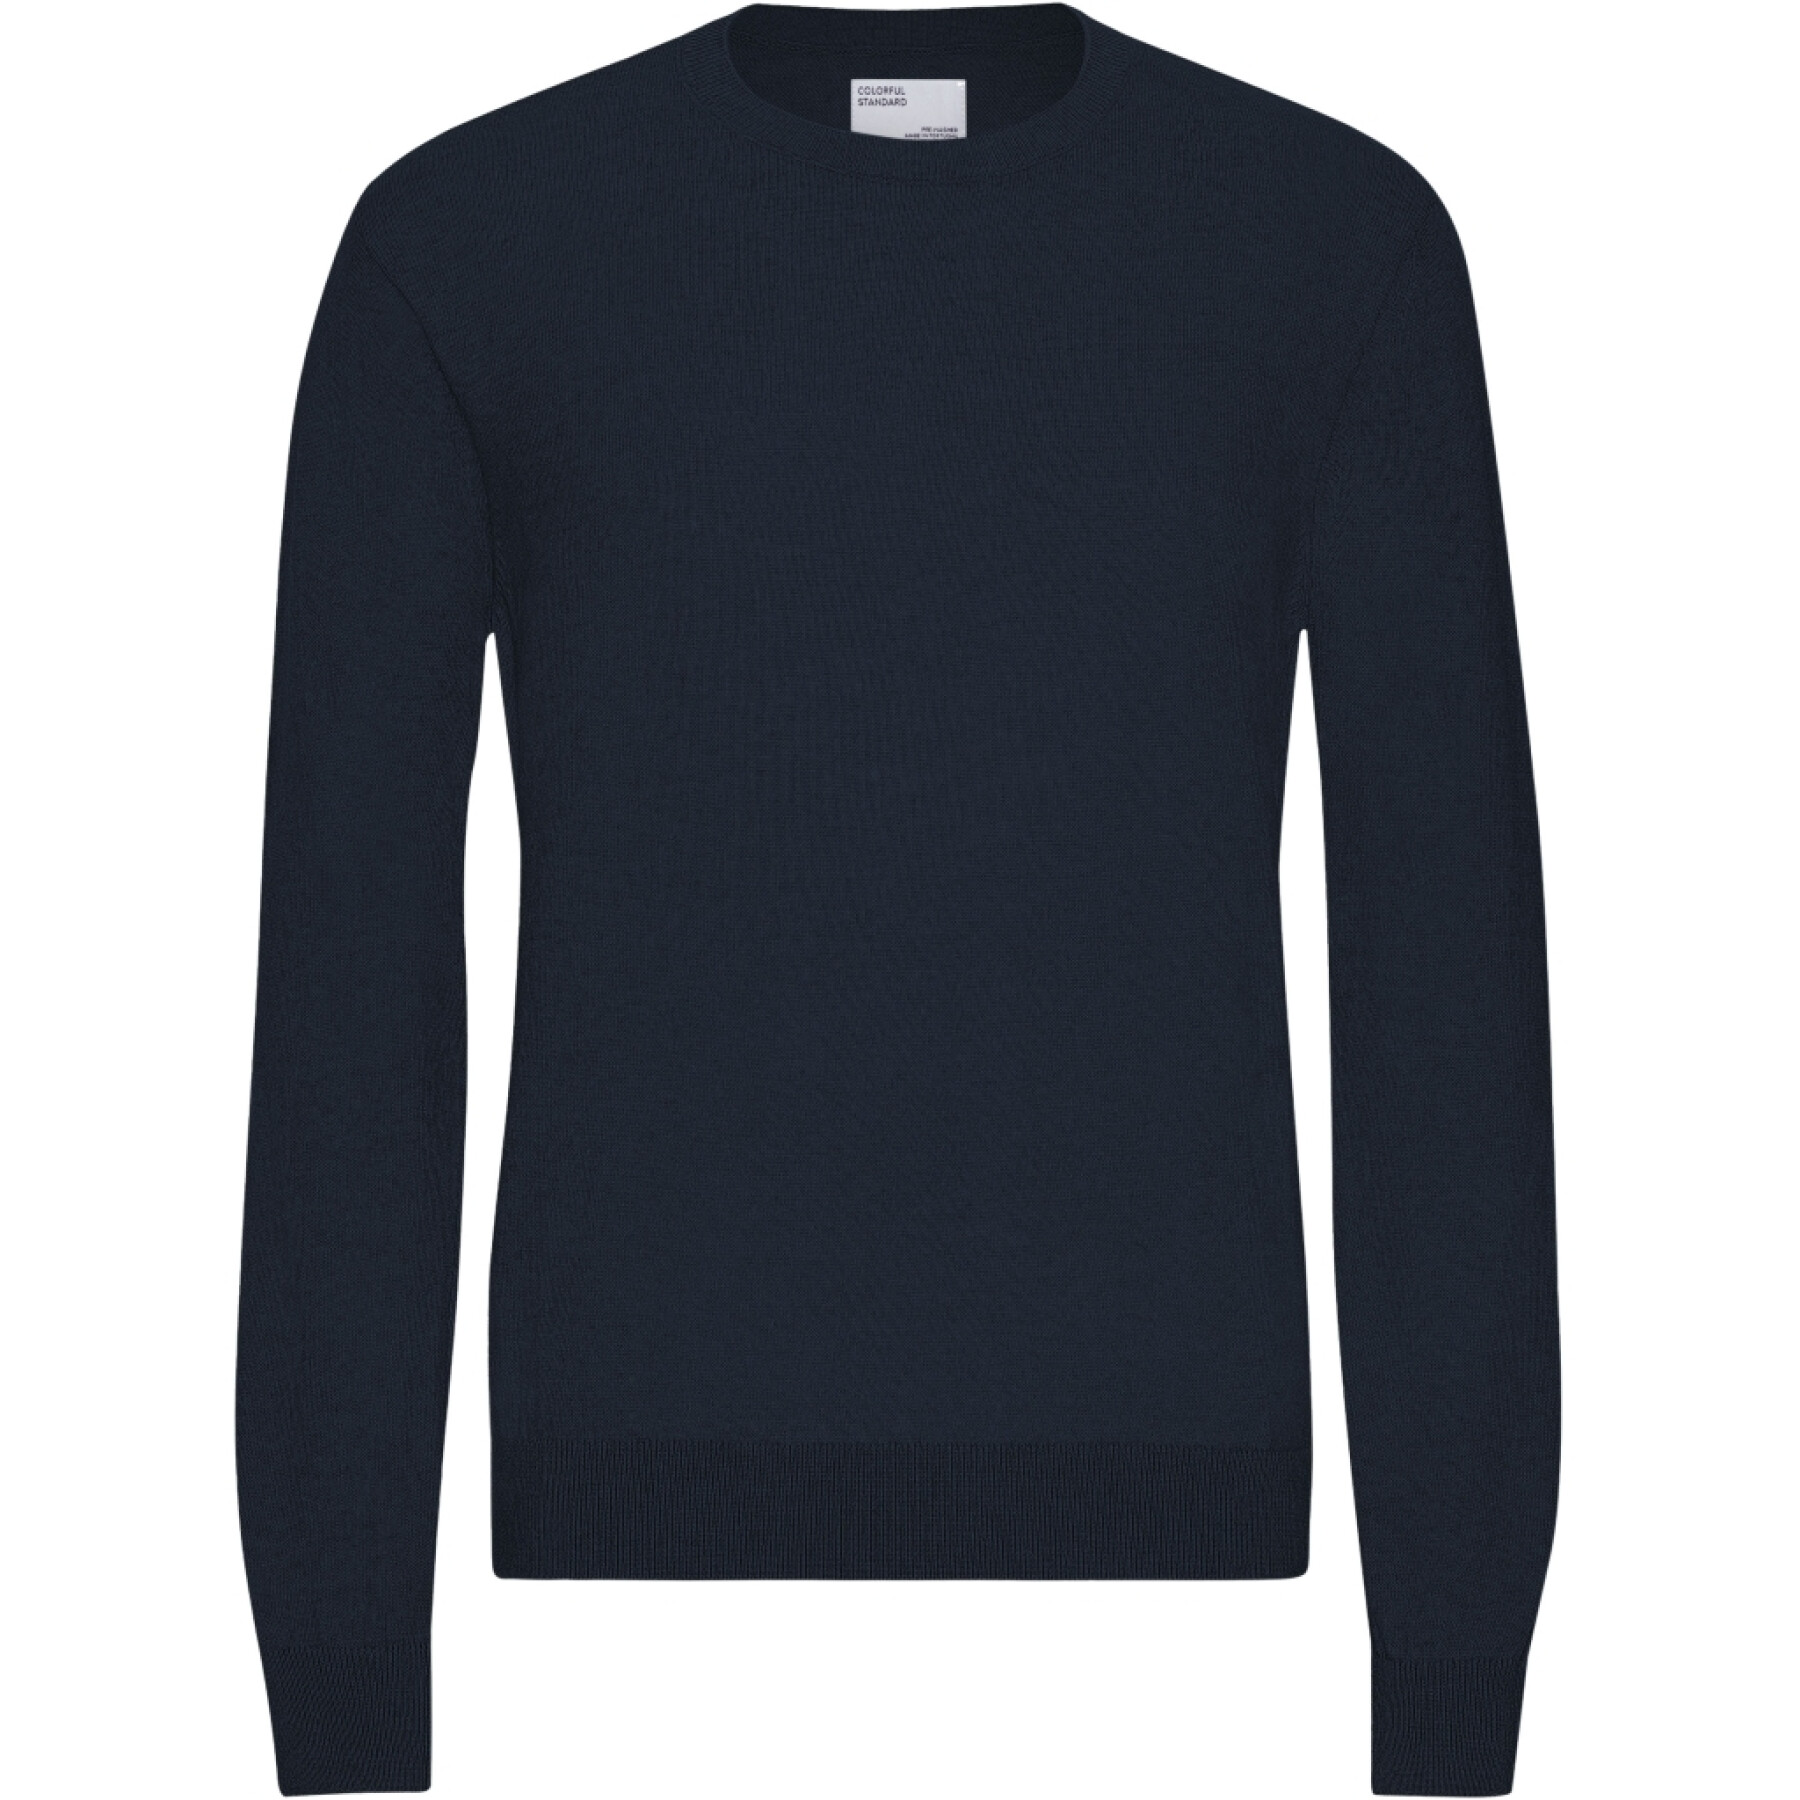 Sweater Colorful Standard Navy Blue